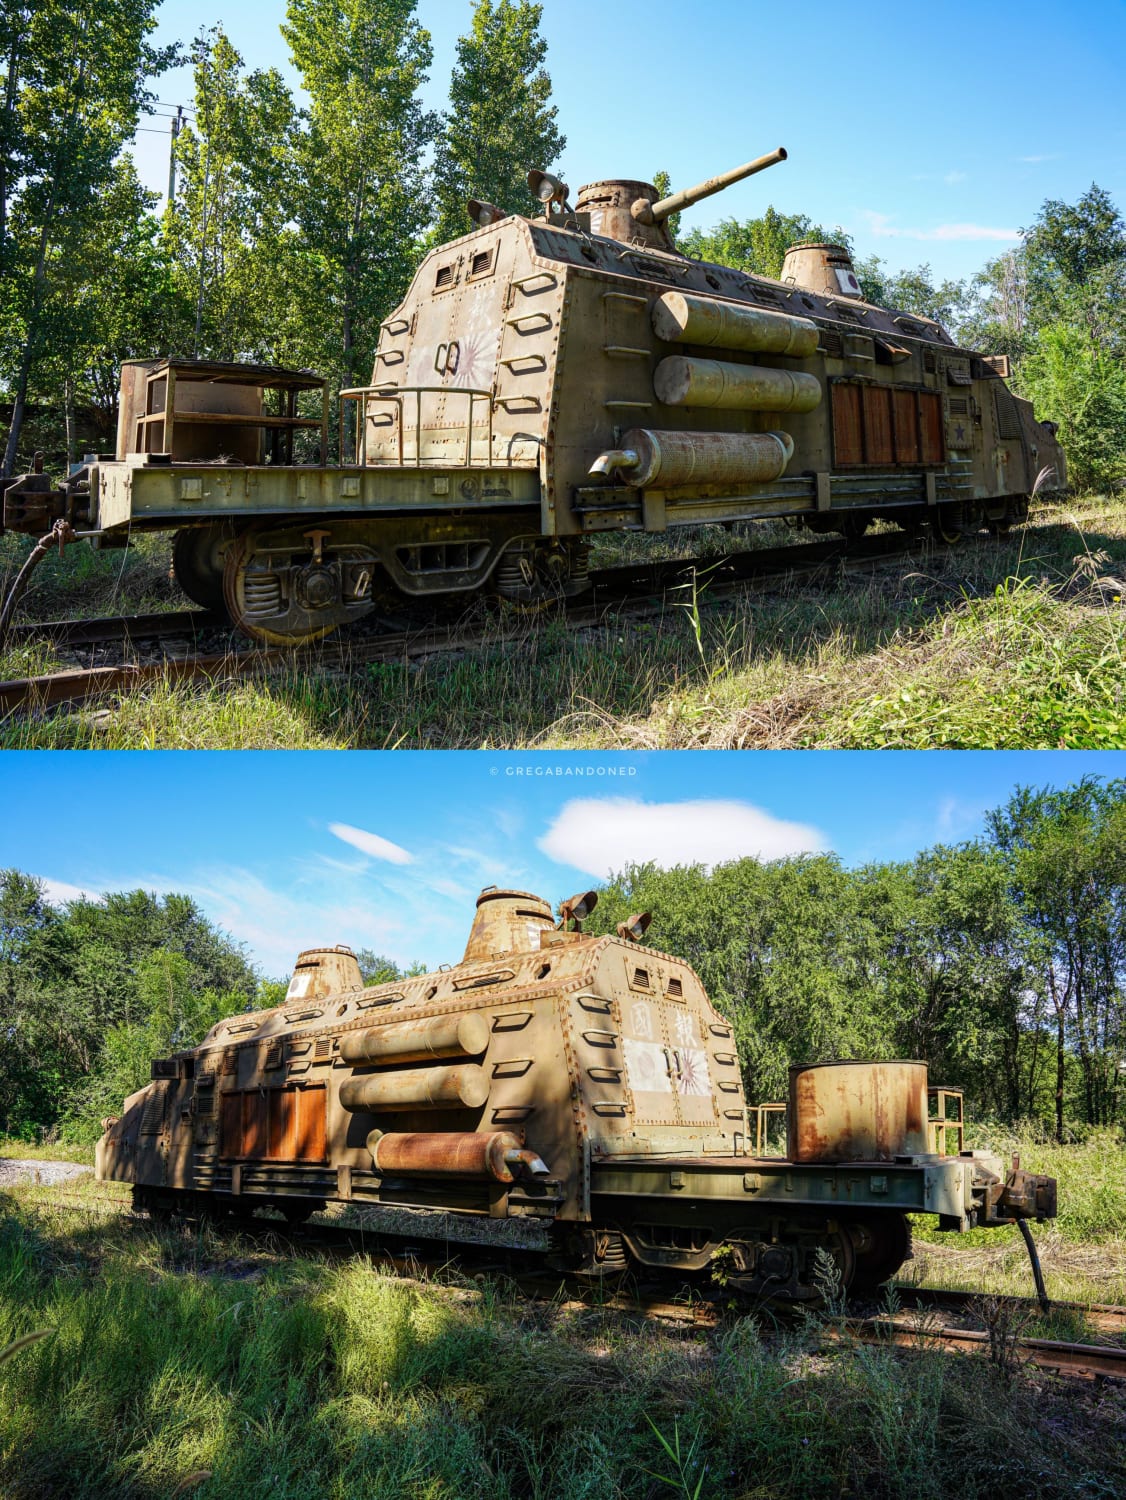 Armoured train found in the abandoned movie set (real train)